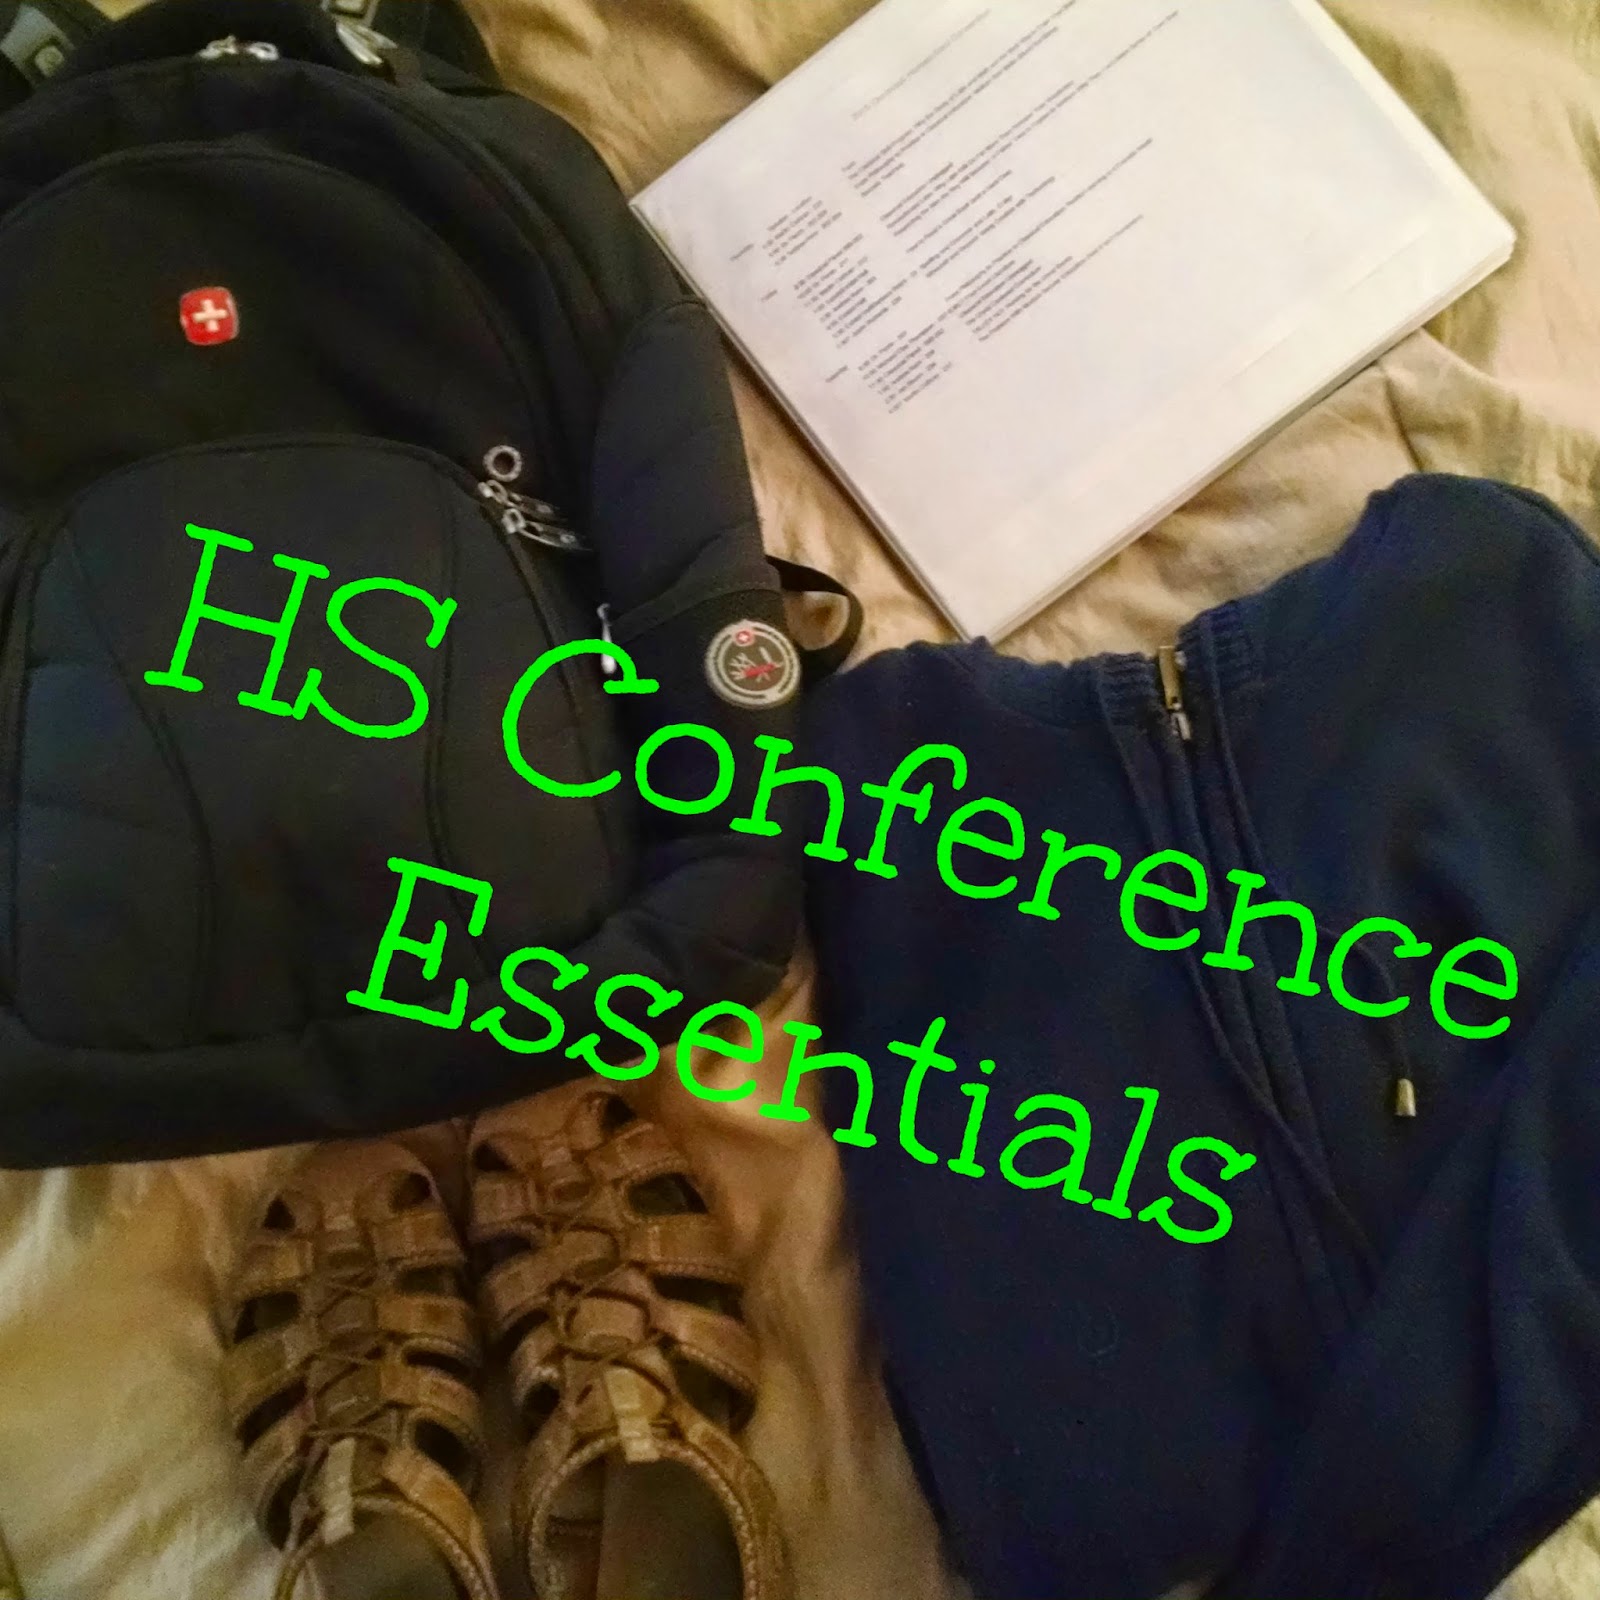 HS Conference Essentials